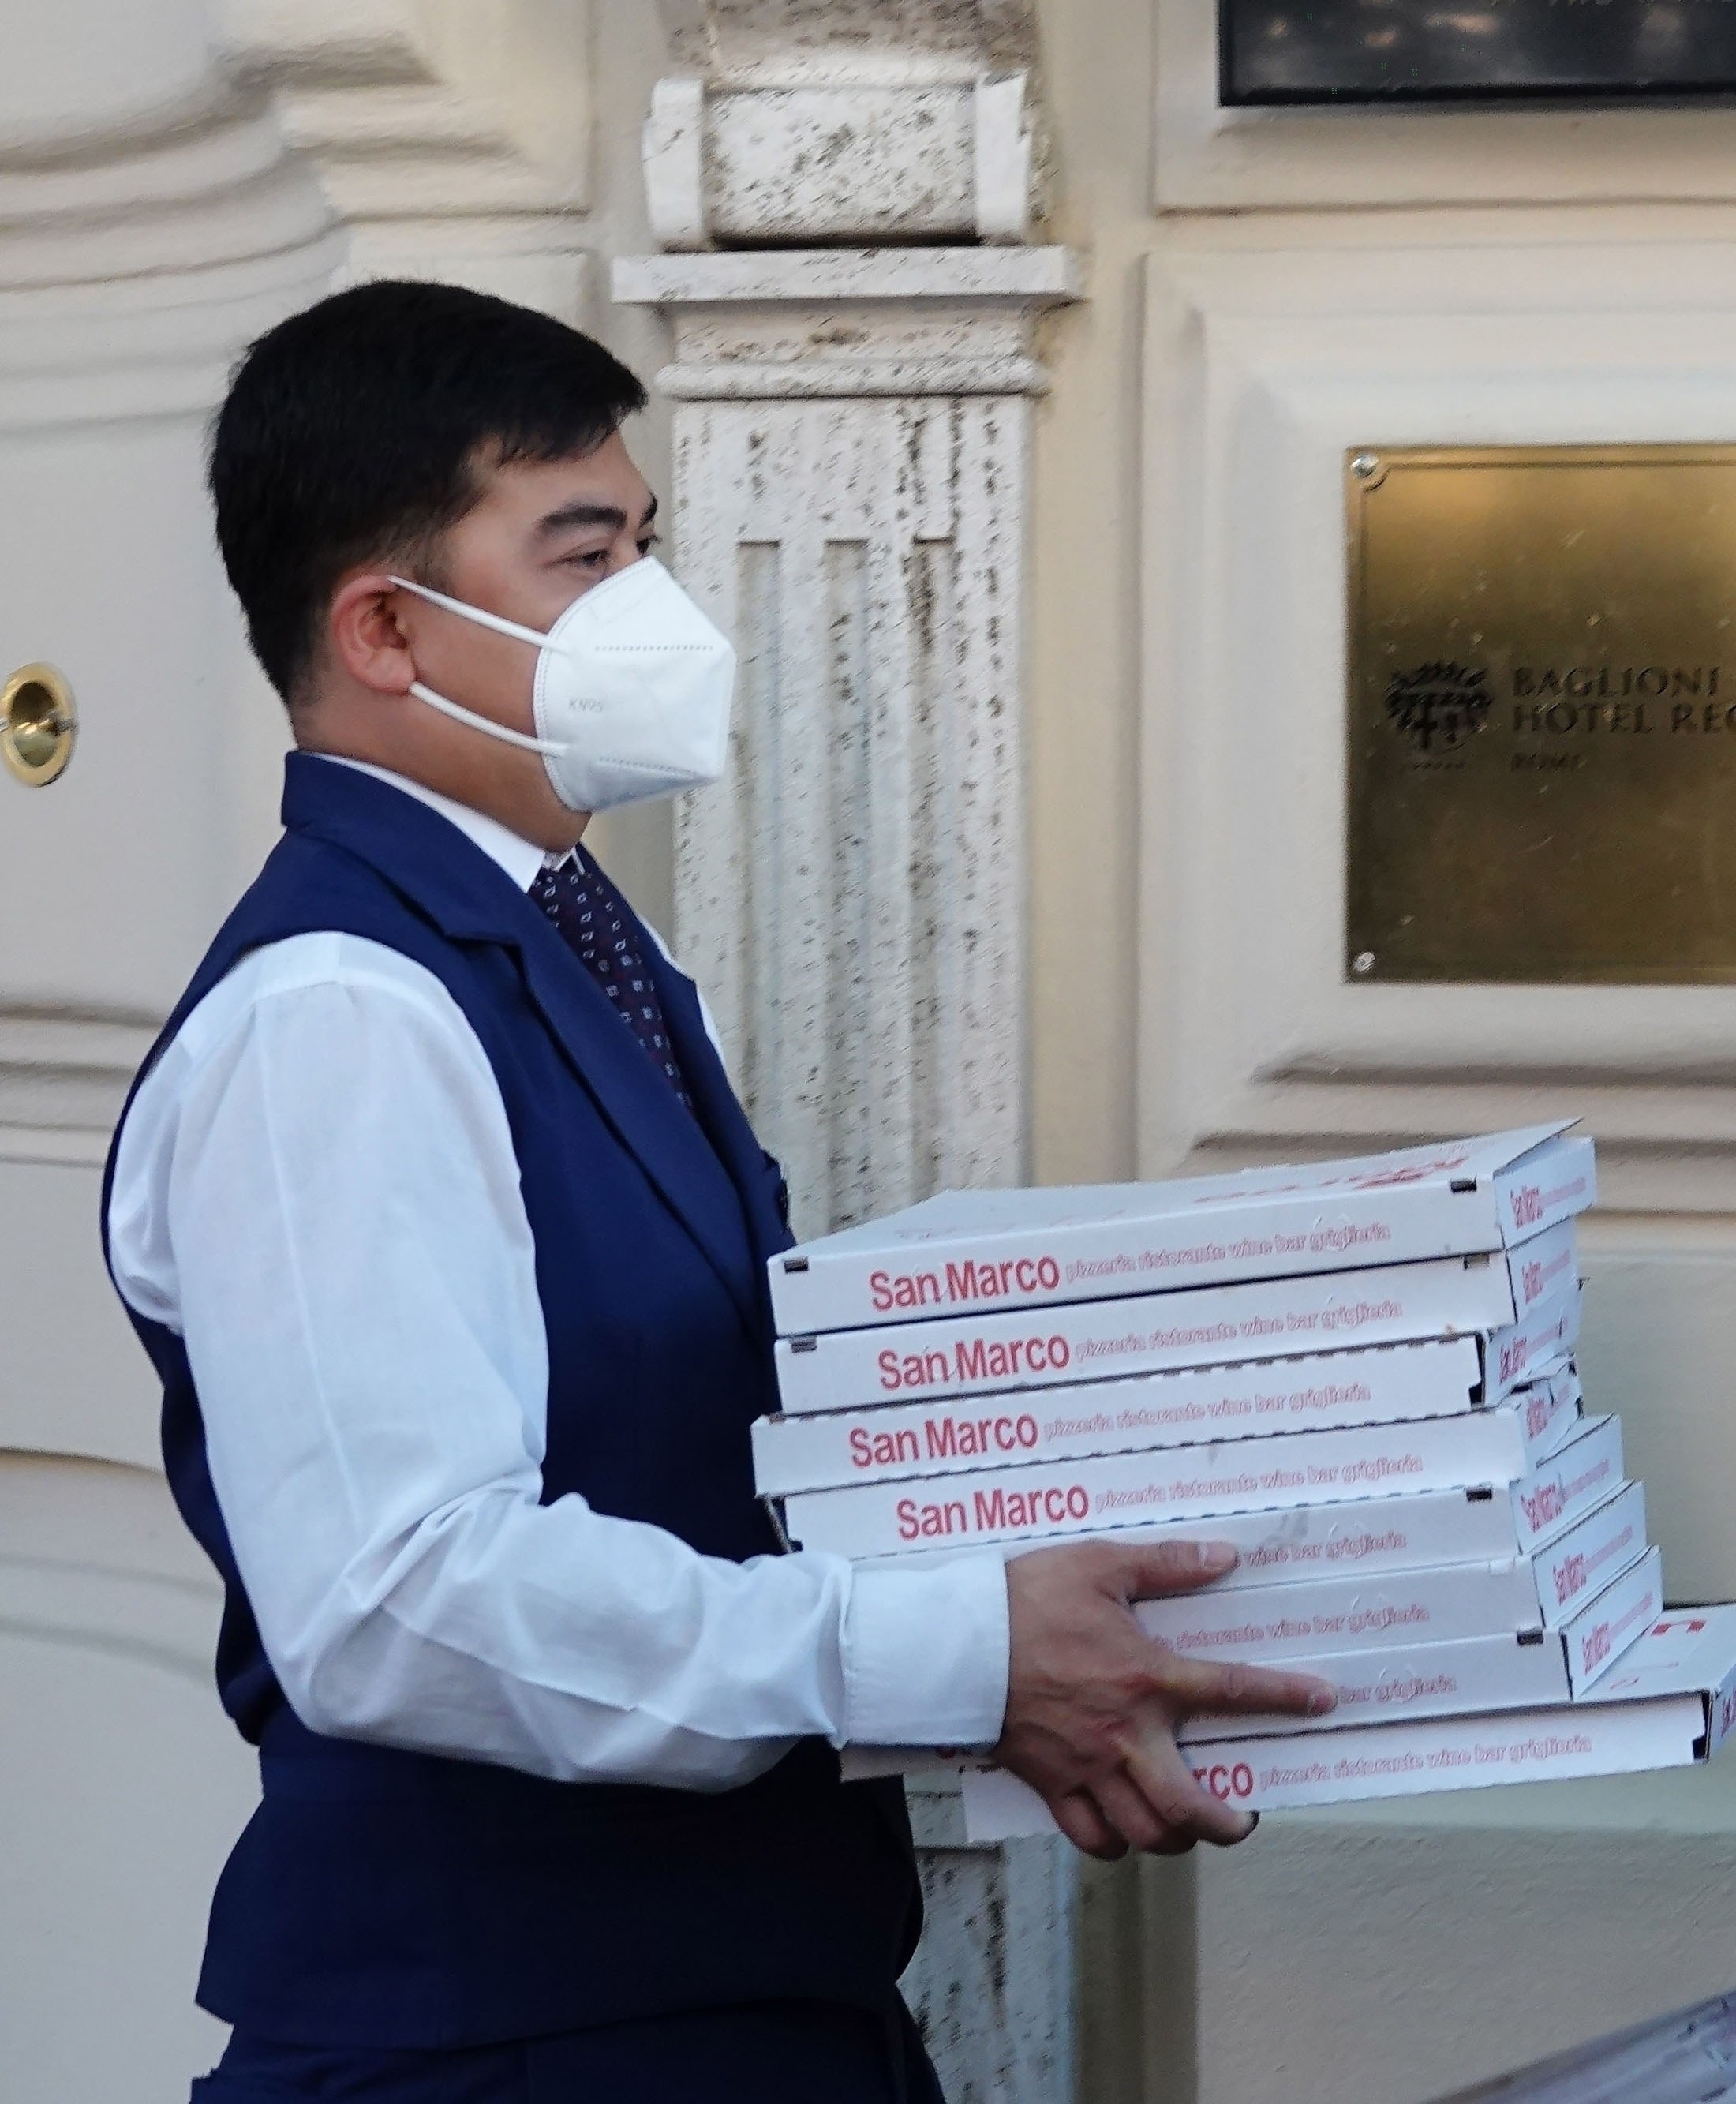 A man holding several boxes of pizza